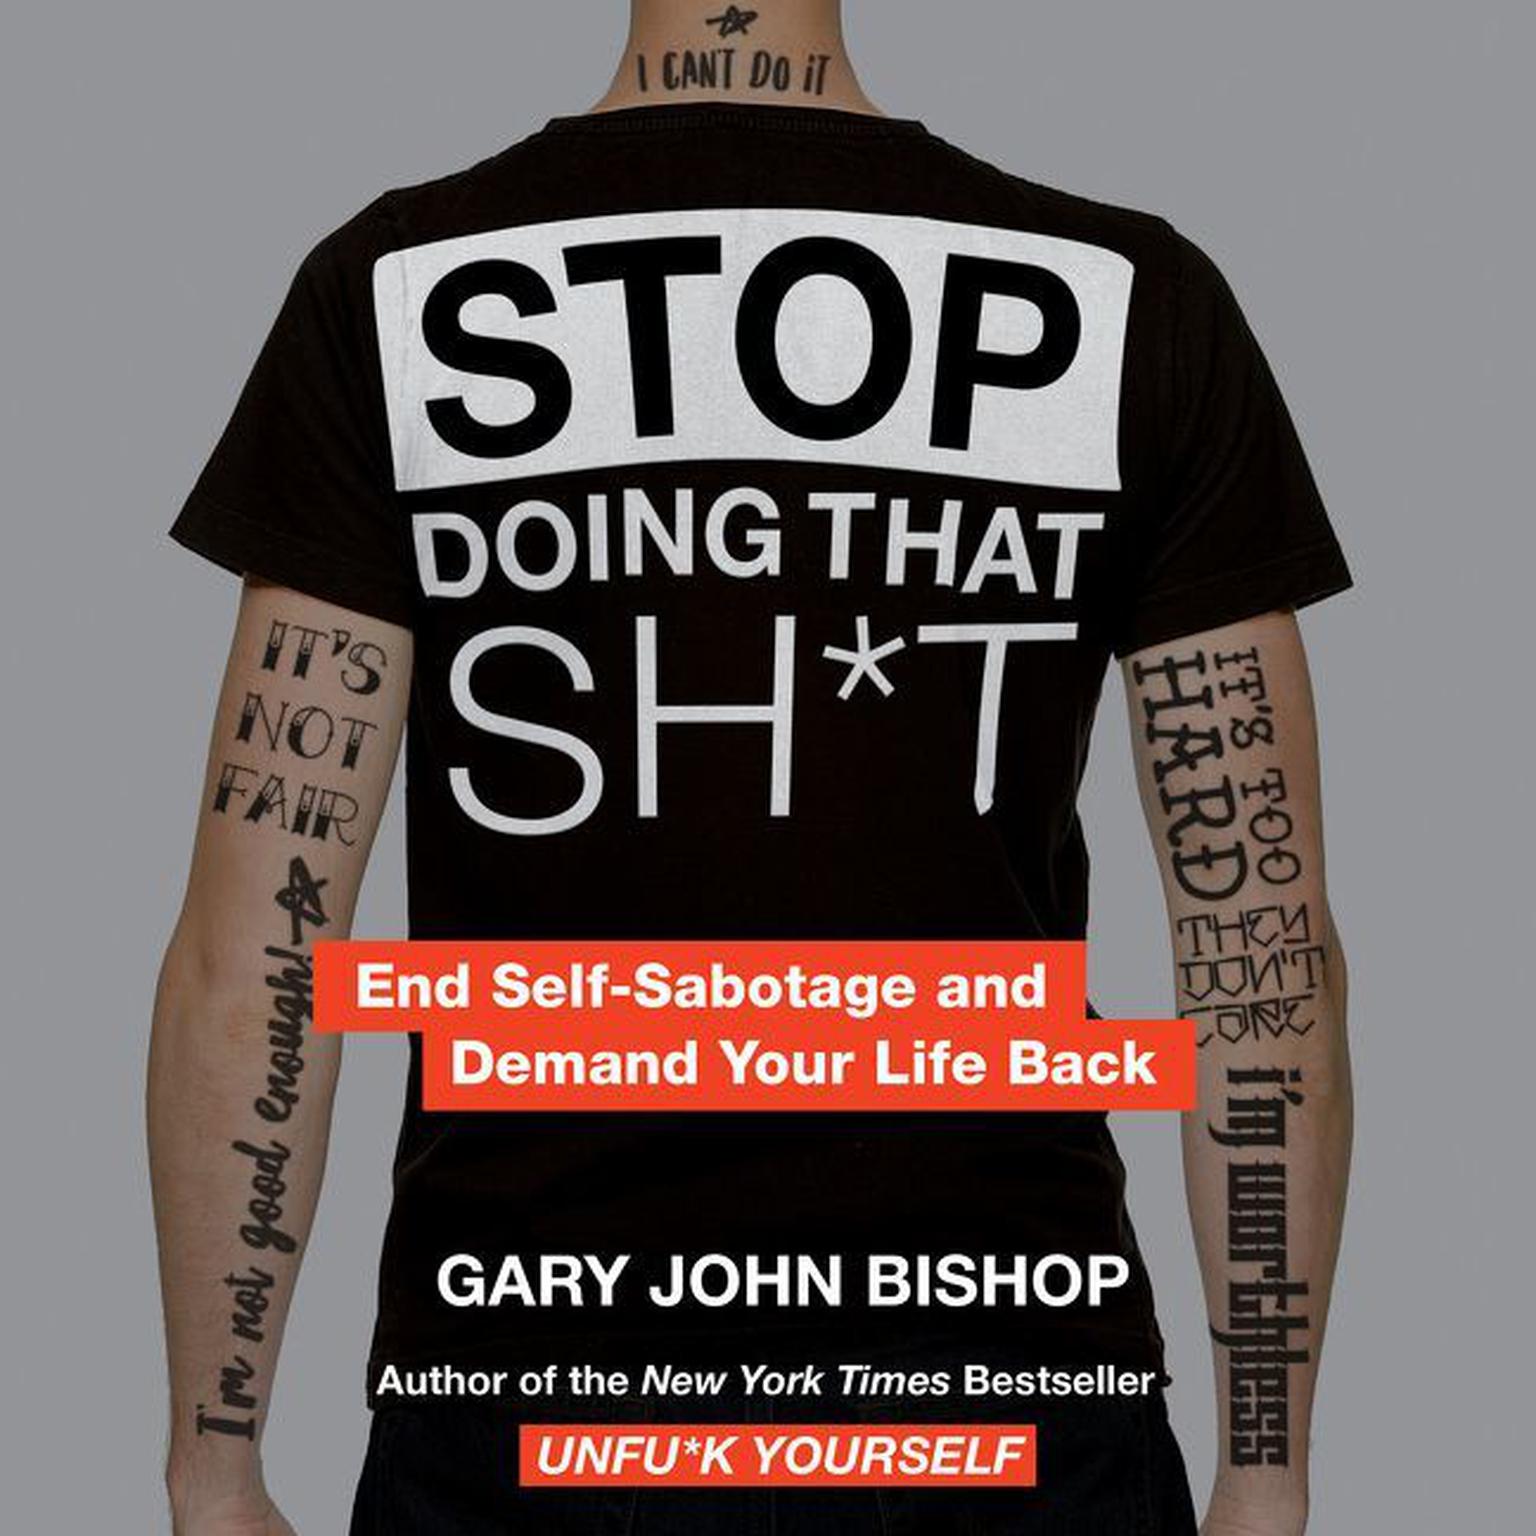 Stop Doing That Sh*t: End Self-Sabotage and Demand Your Life Back Audiobook, by Gary John Bishop